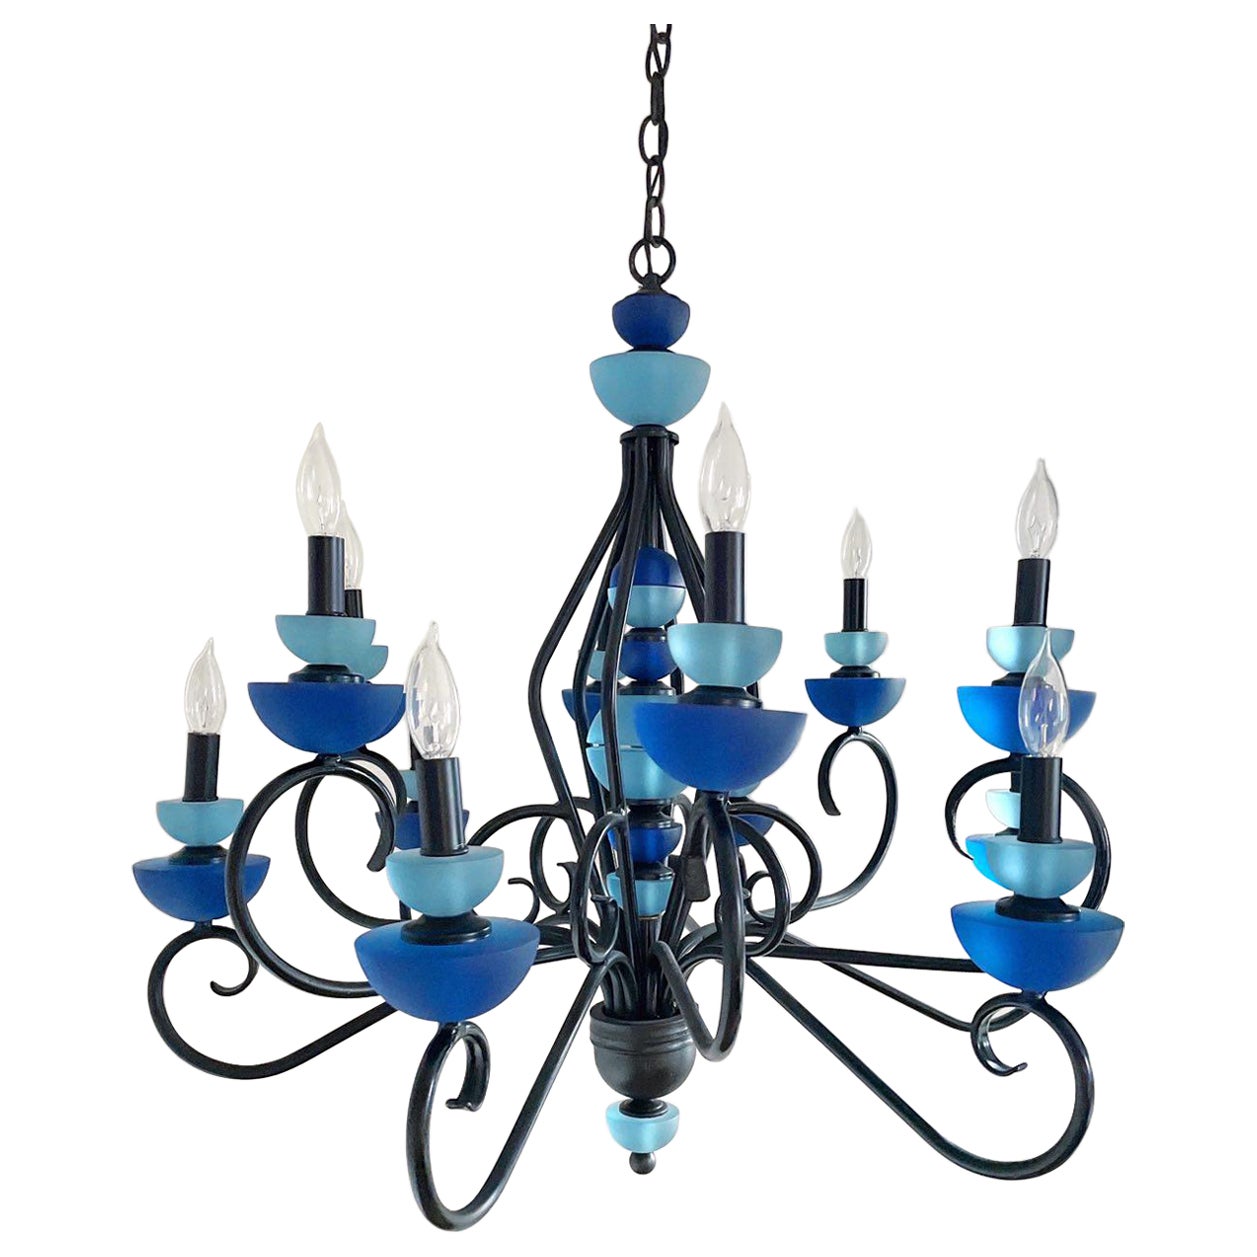 Hivo Van Teal Wrought Iron and Blue Lucite Chandelier For Sale